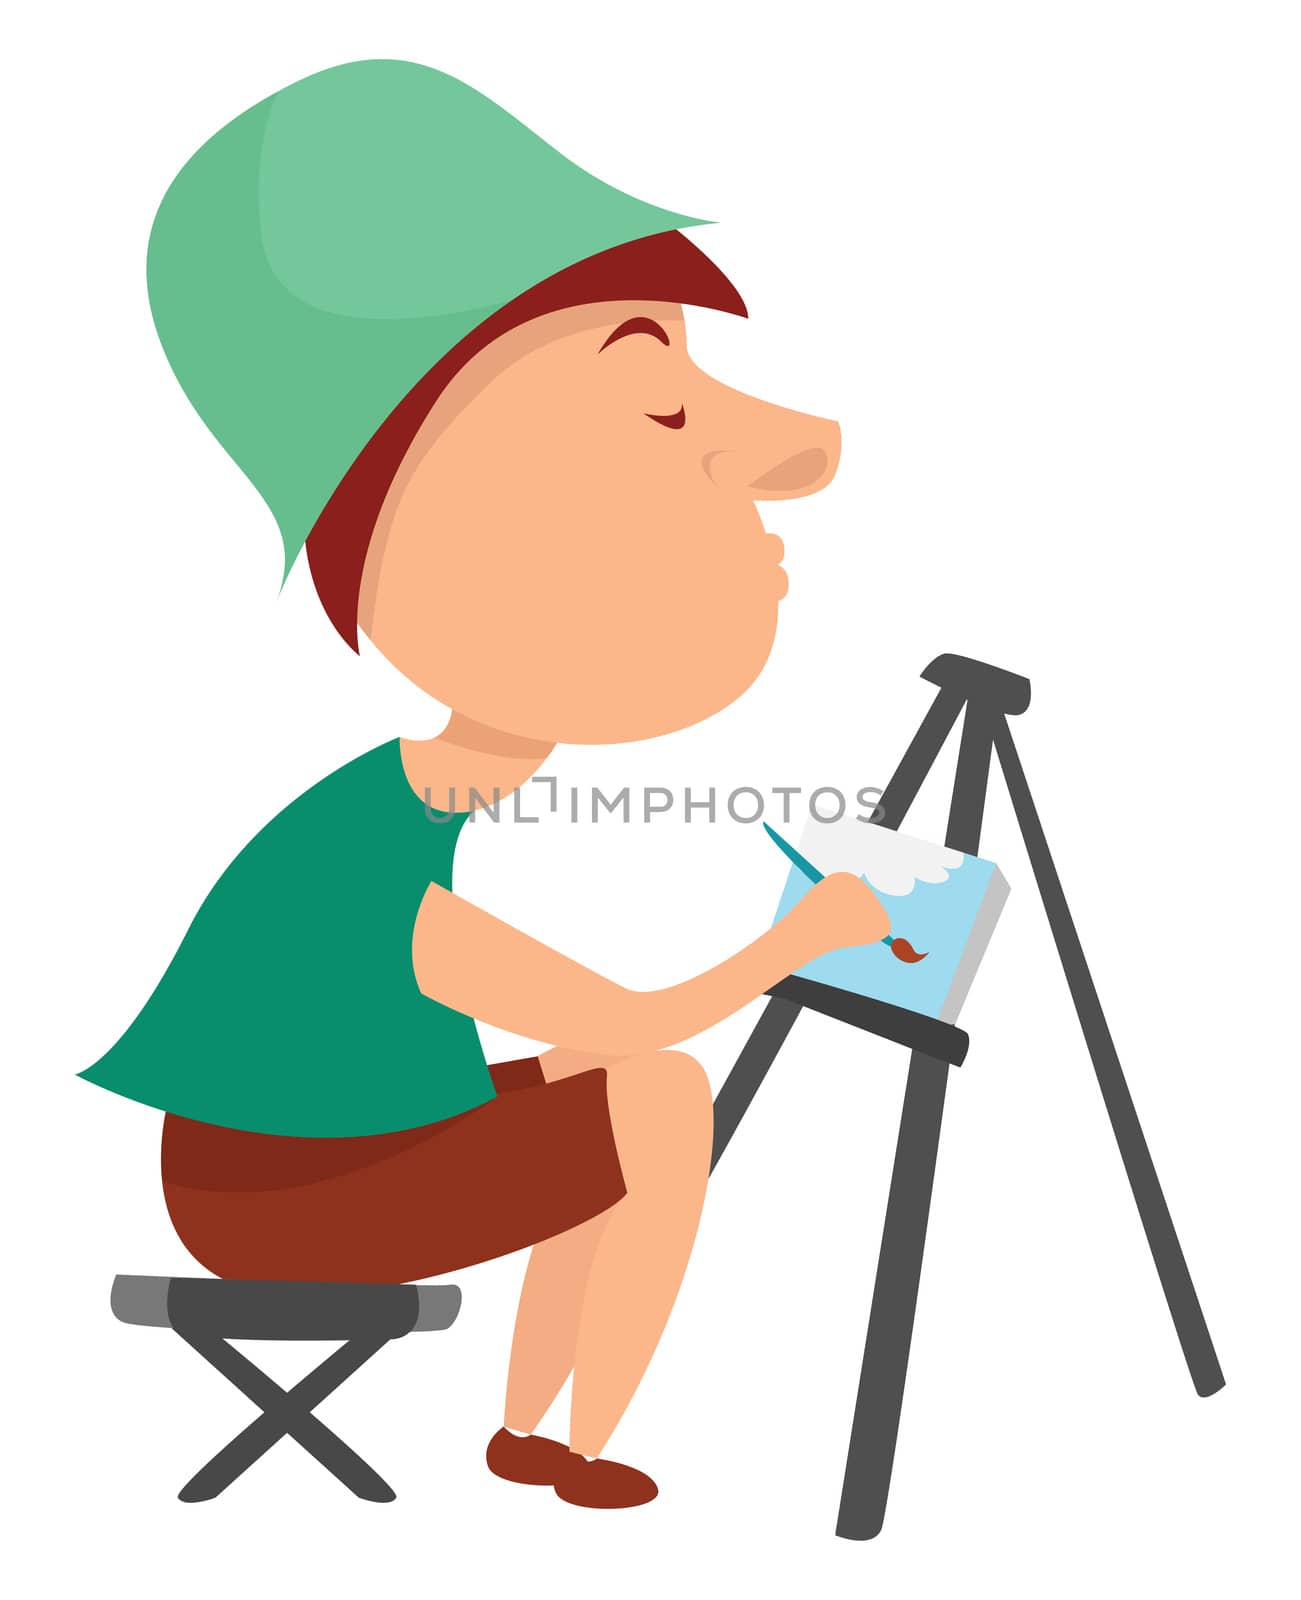 Plein air painting , illustration, vector on white background by Morphart